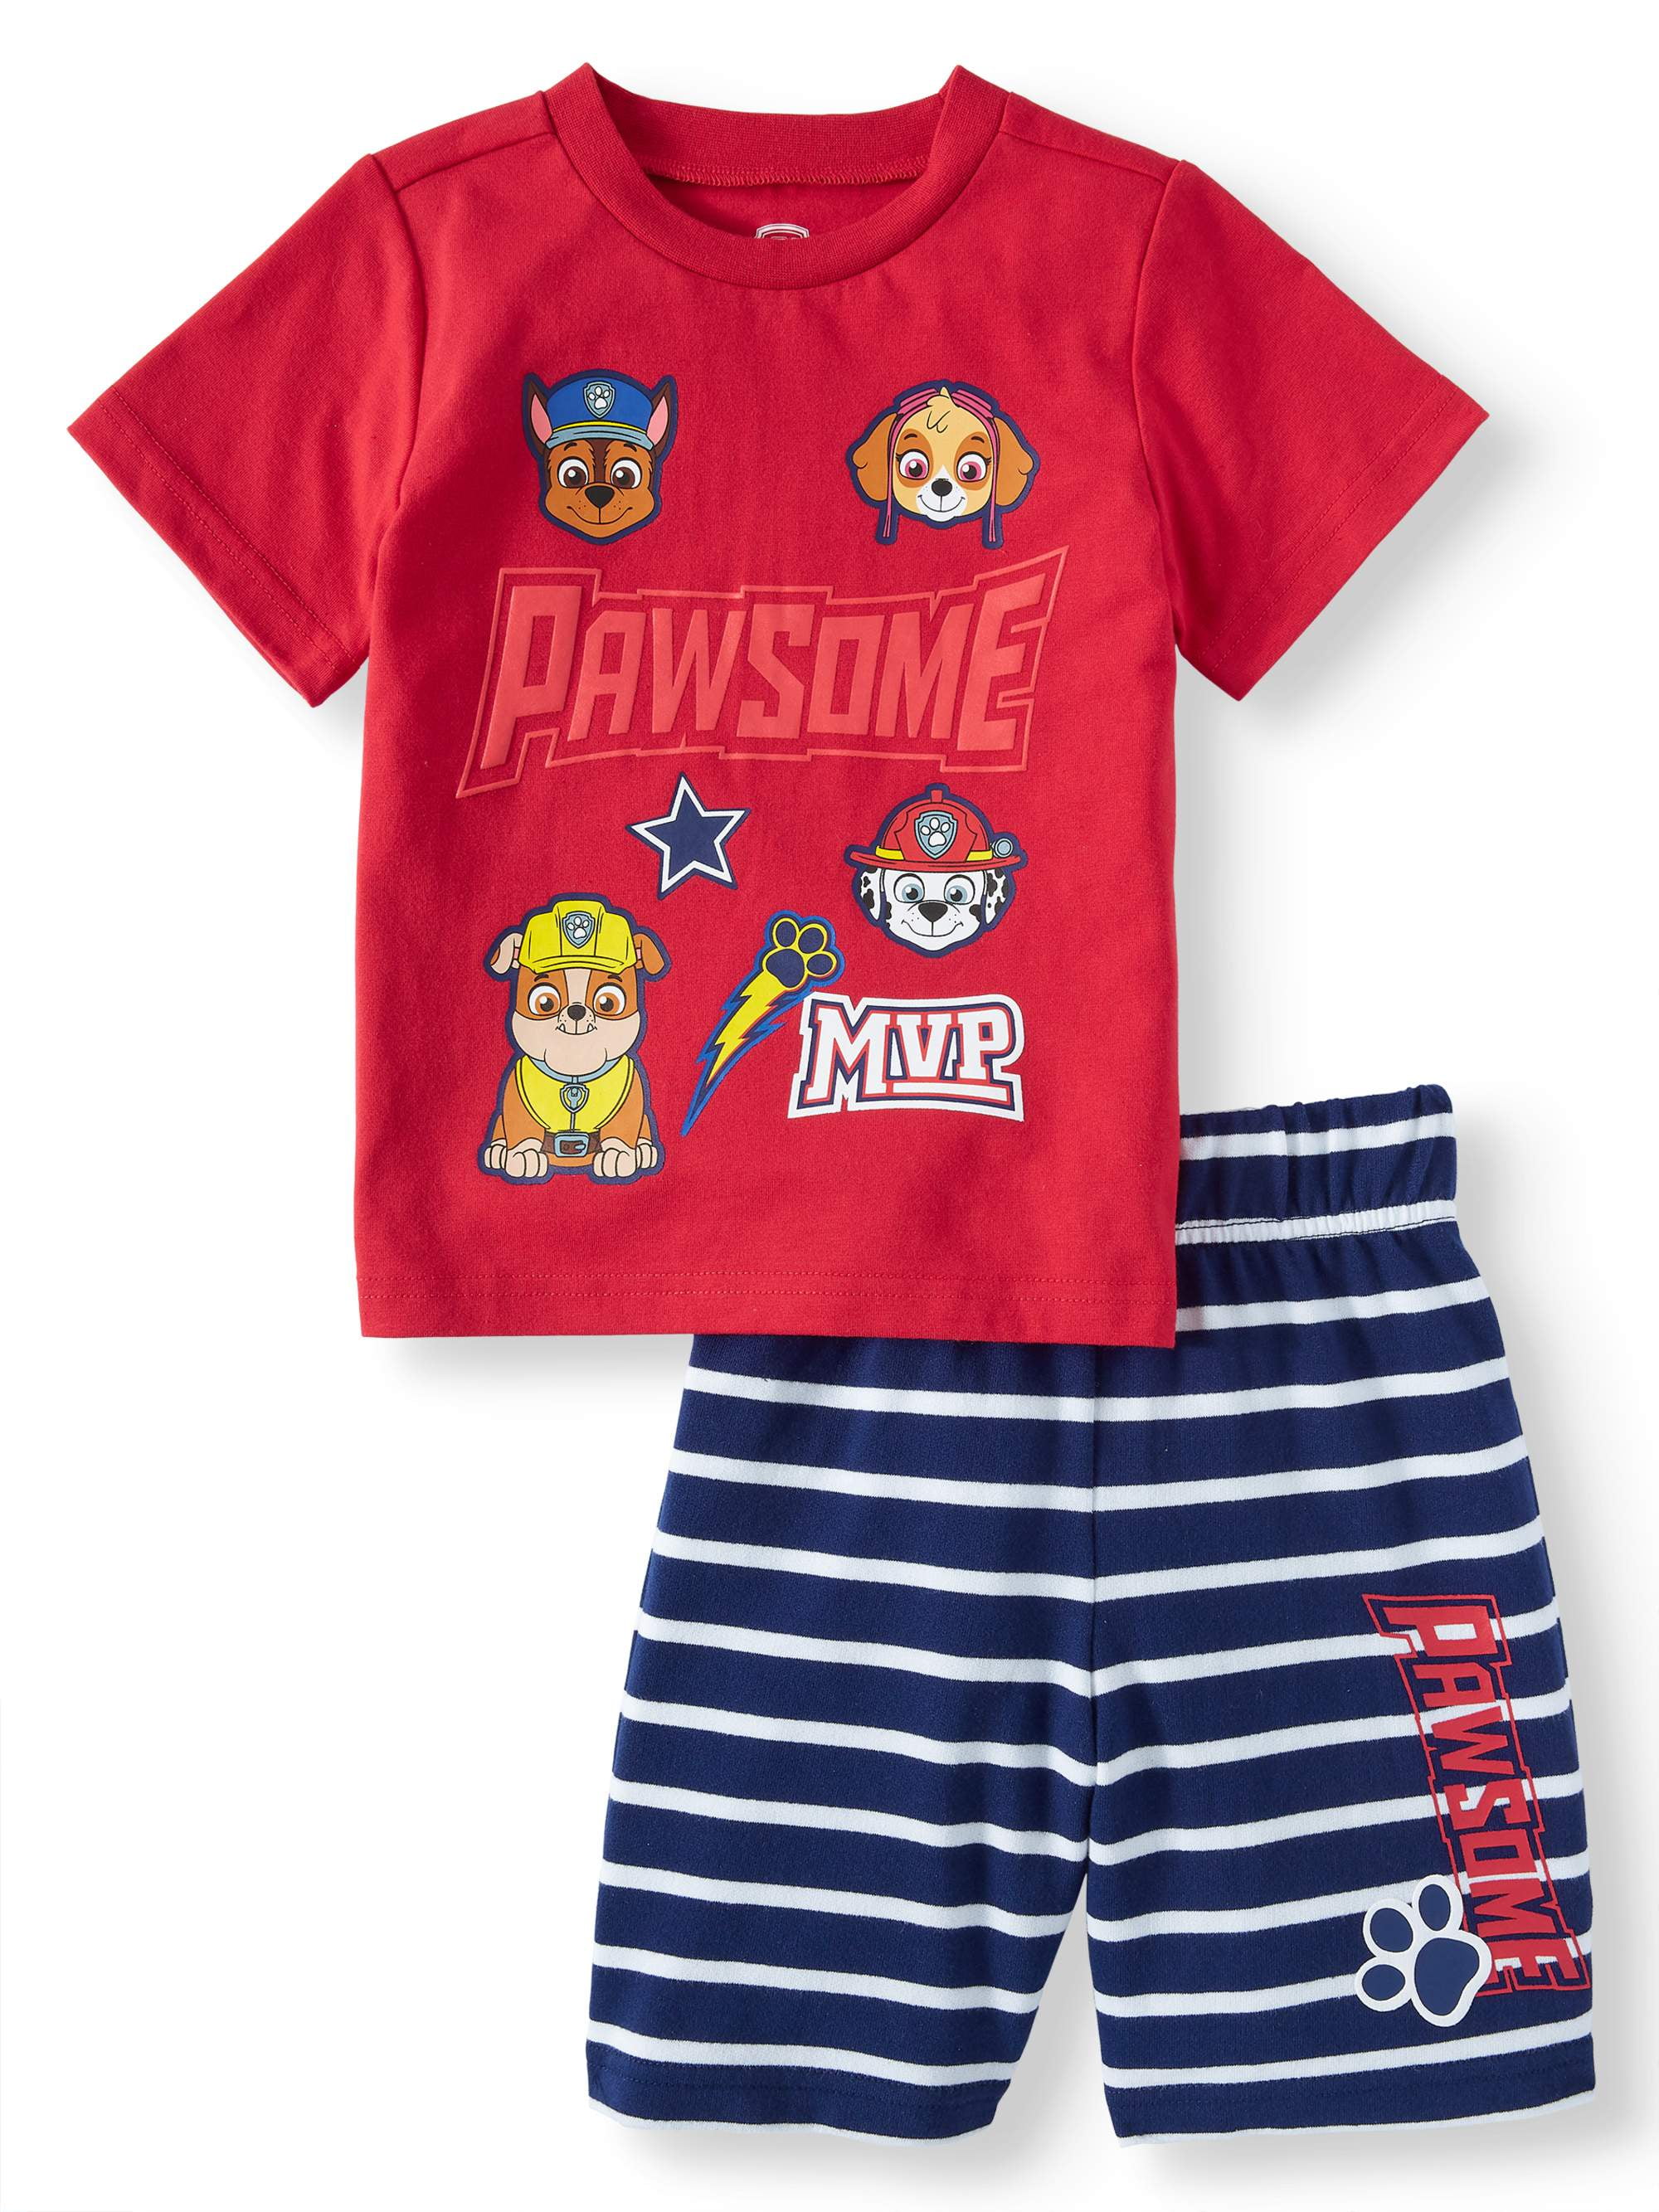 Boys Paw Patrol Ready for Action T-Shirt & Camo Shorts Set 12 Months to 6 Years 